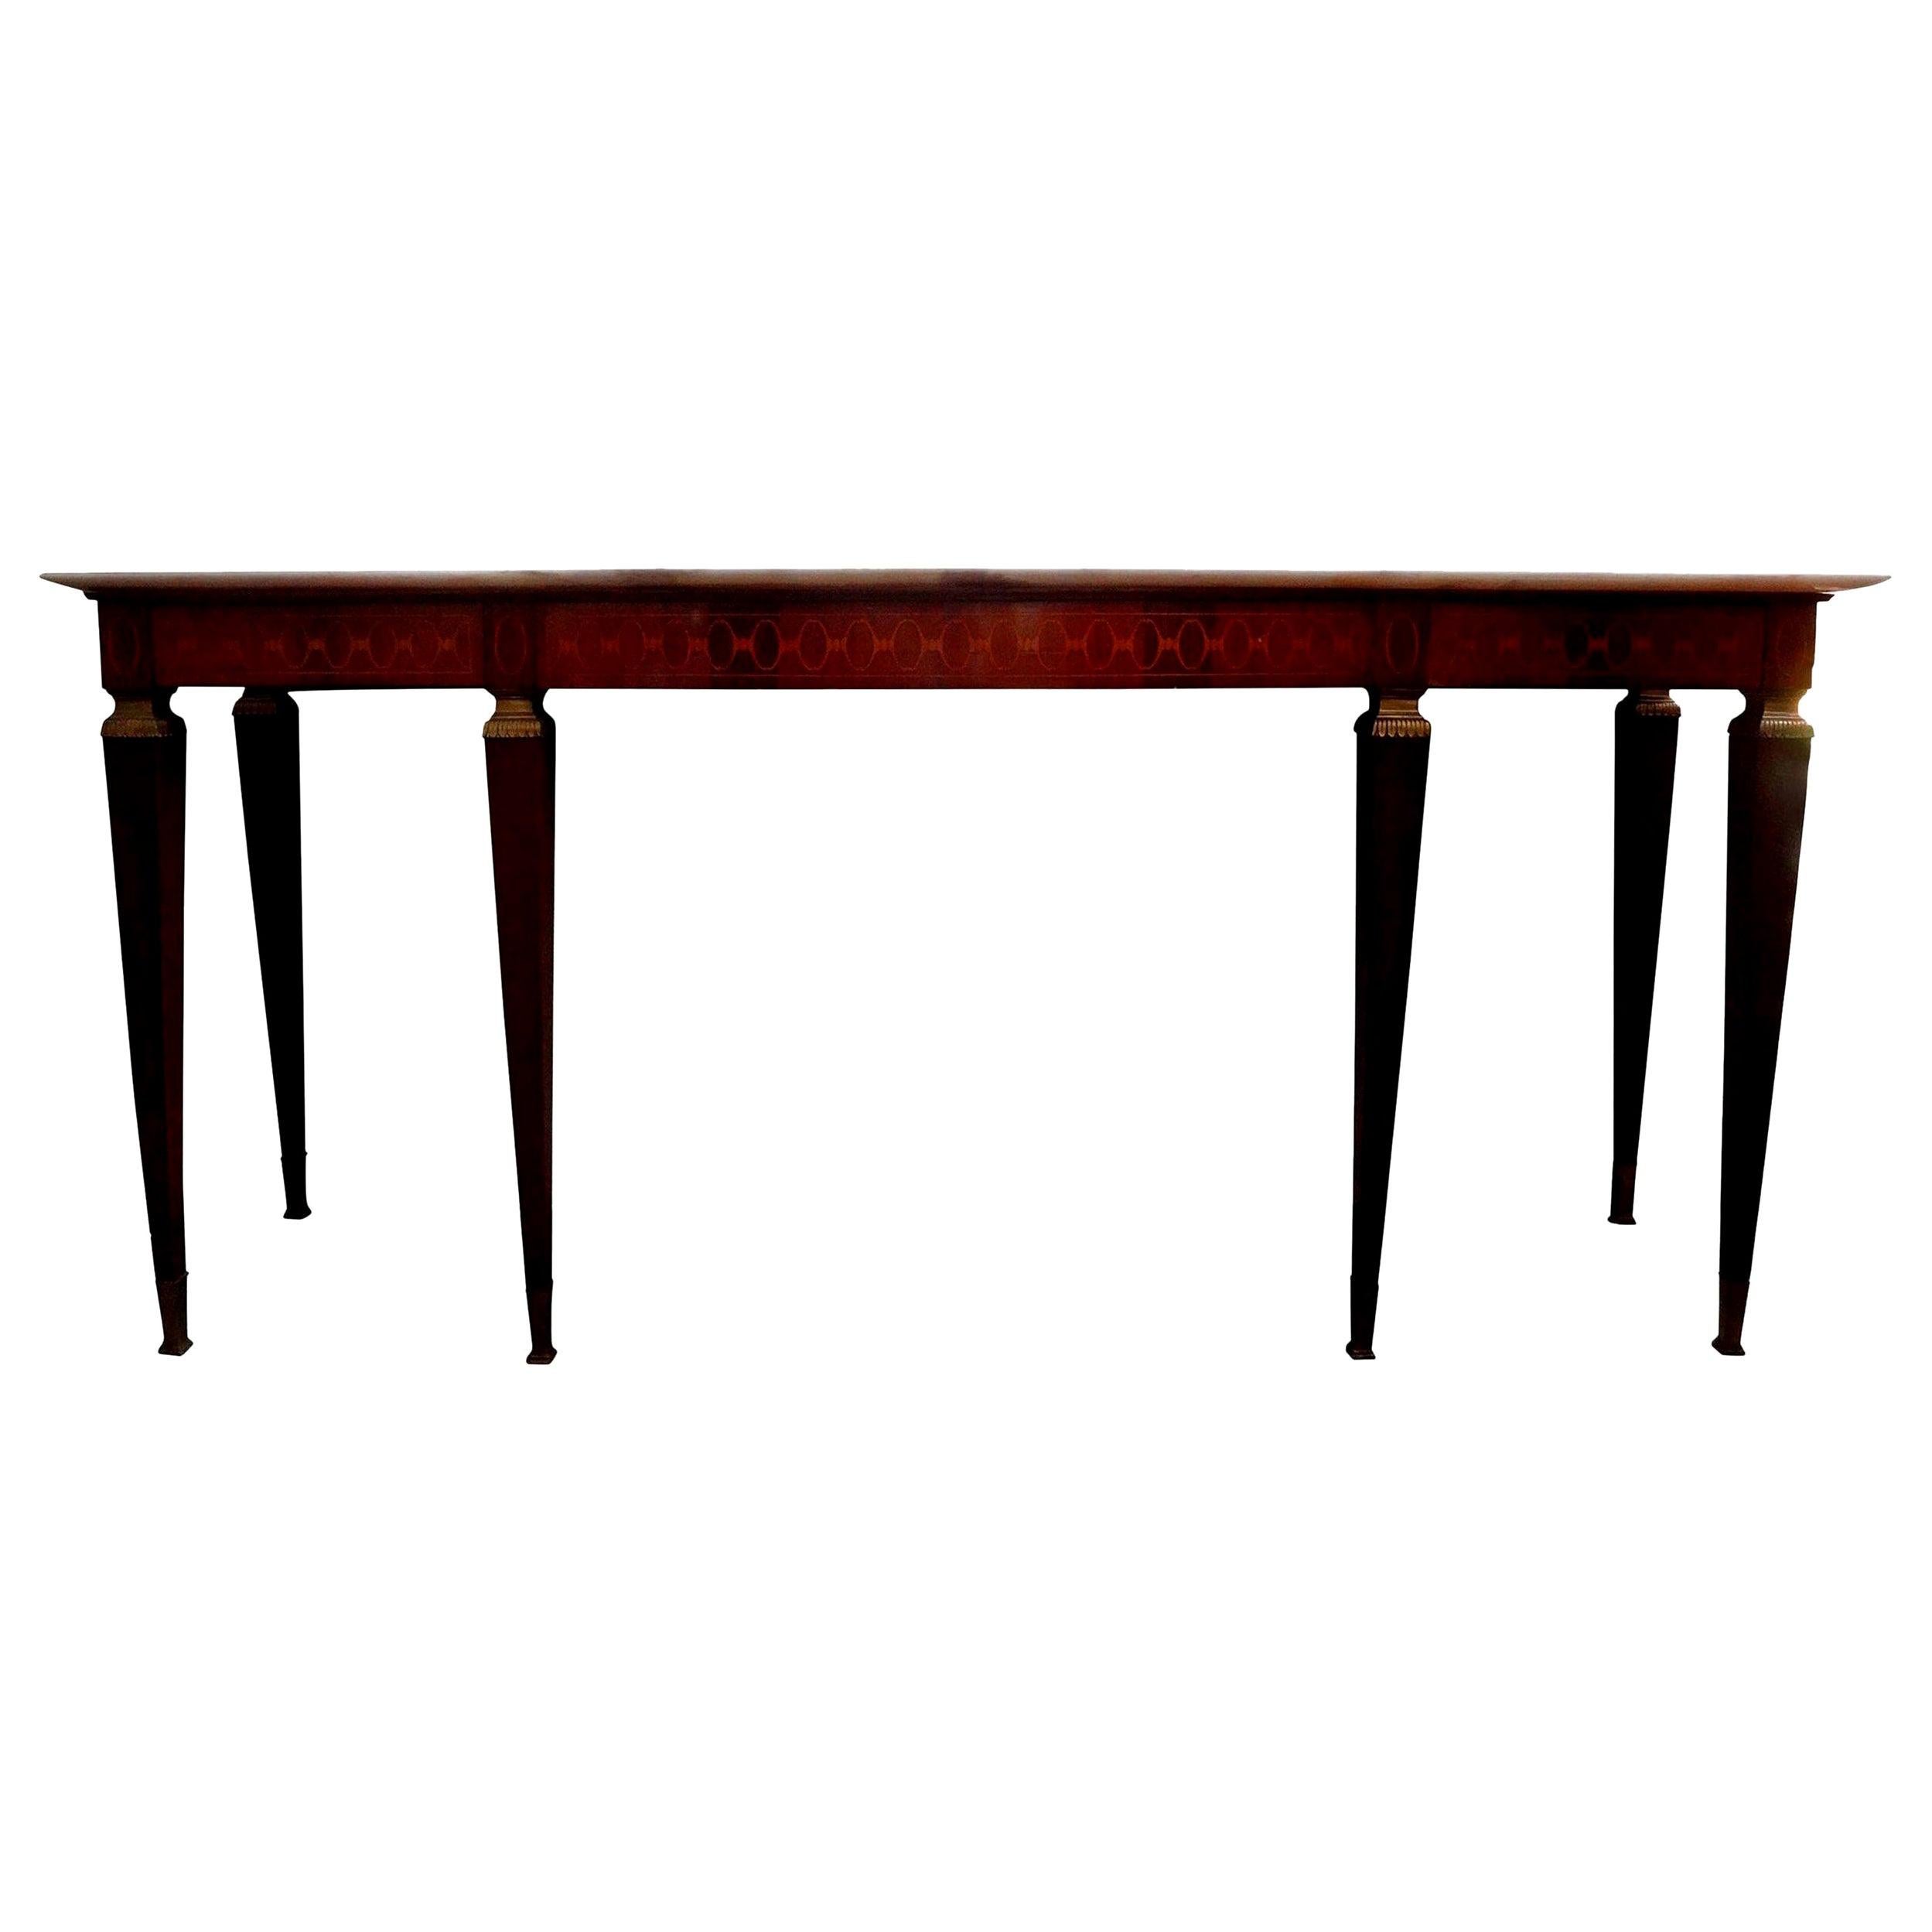 Large Italian Neoclassical Style Console Table Attributed to Paolo Buffa